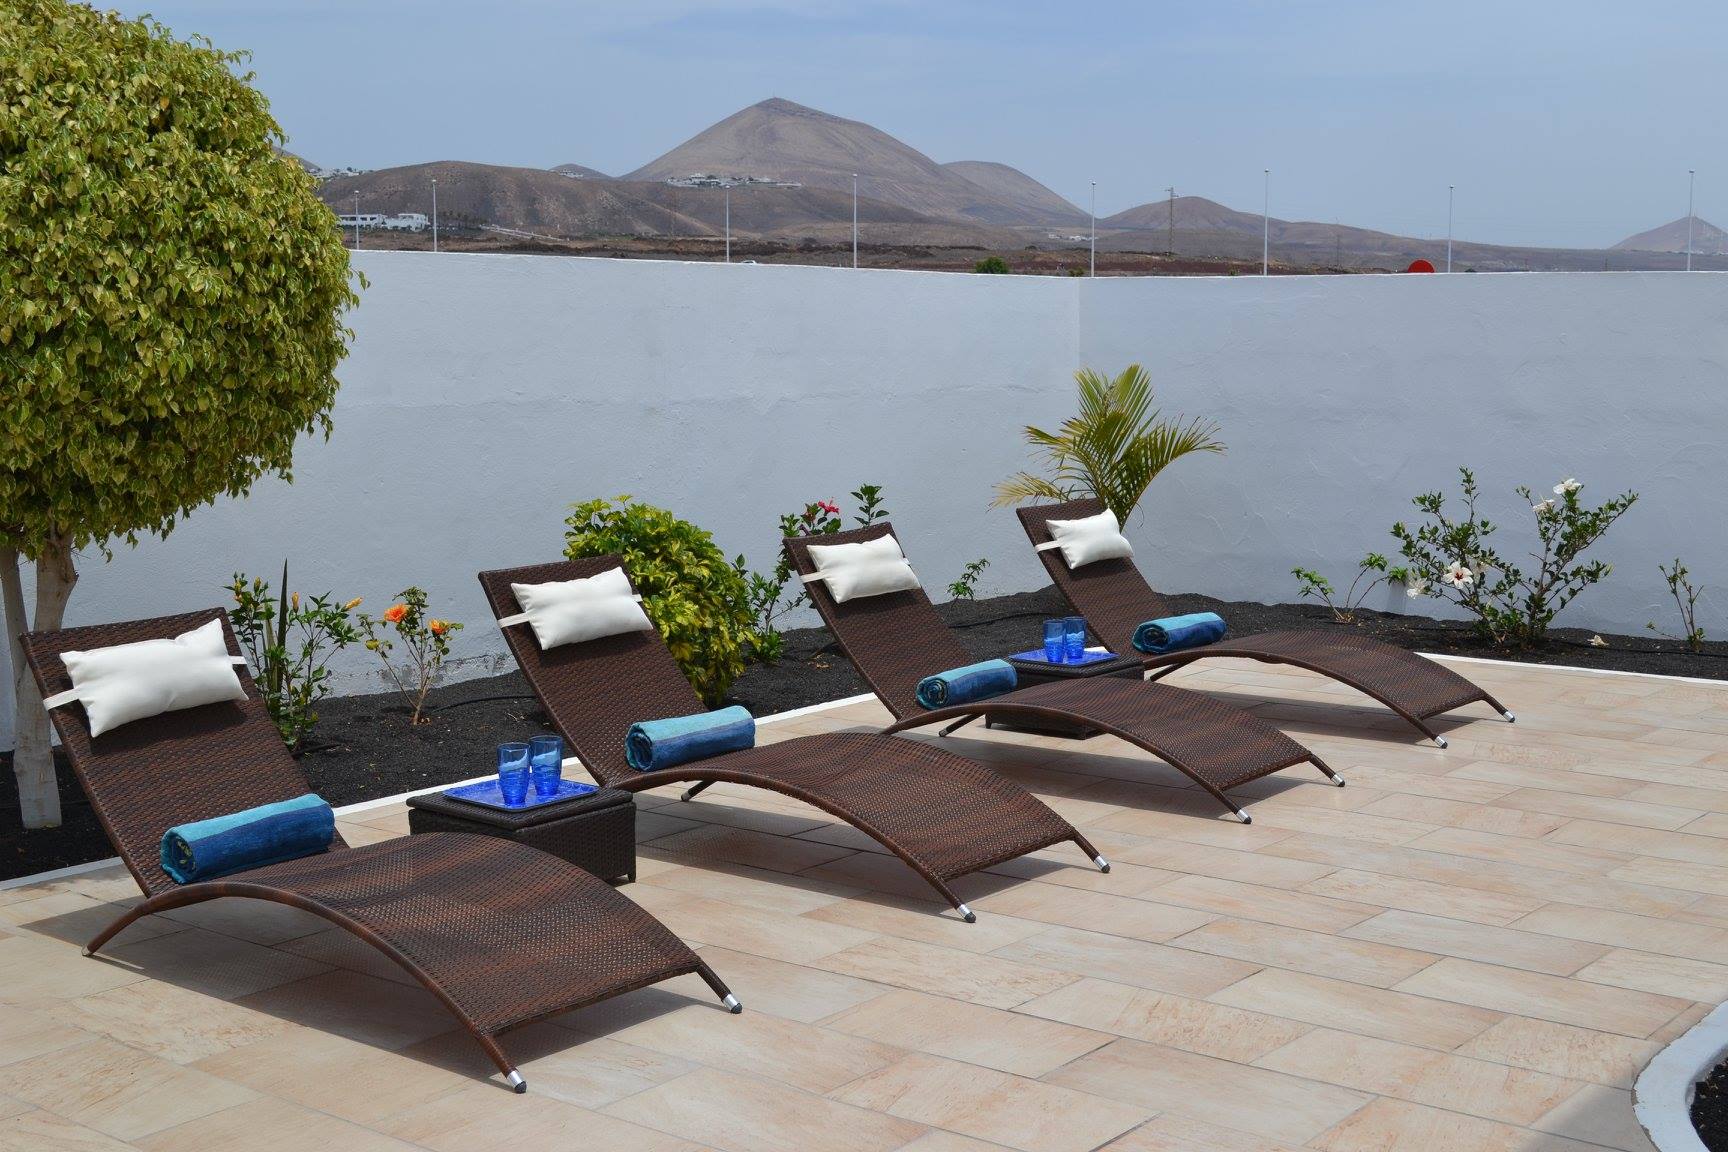 Property Management in Lanzarote